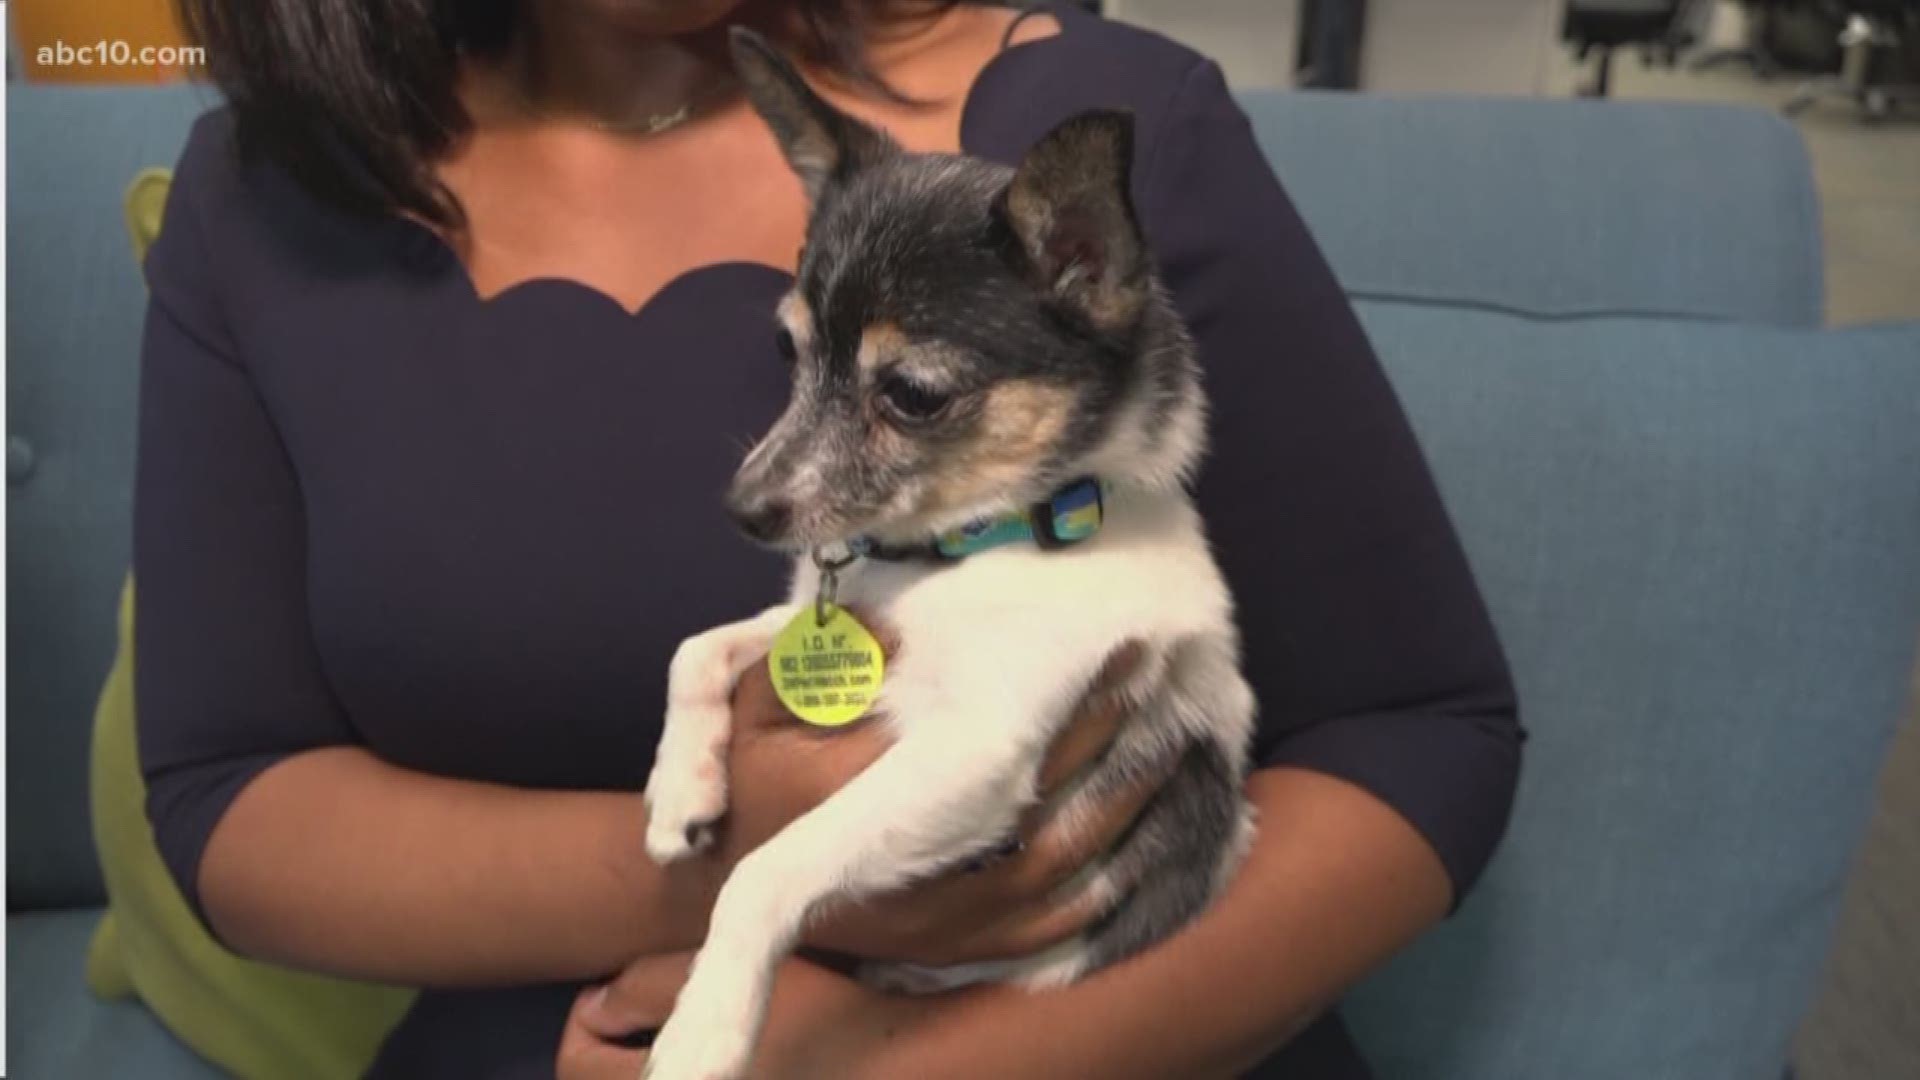 Meet Cookie, ABC10's Pet of the Week from the Sacramento SPCA. Cookie is 8 years old and weighs only 4 1/2 pounds. She loves people and loves being held. While she reigns supreme as Queen of Lap Dogs, she has no probably sharing a home with other pups. Her adoption fee is $110, but, with the Senior to Senior program, you can get the fee waived if you're over 65.